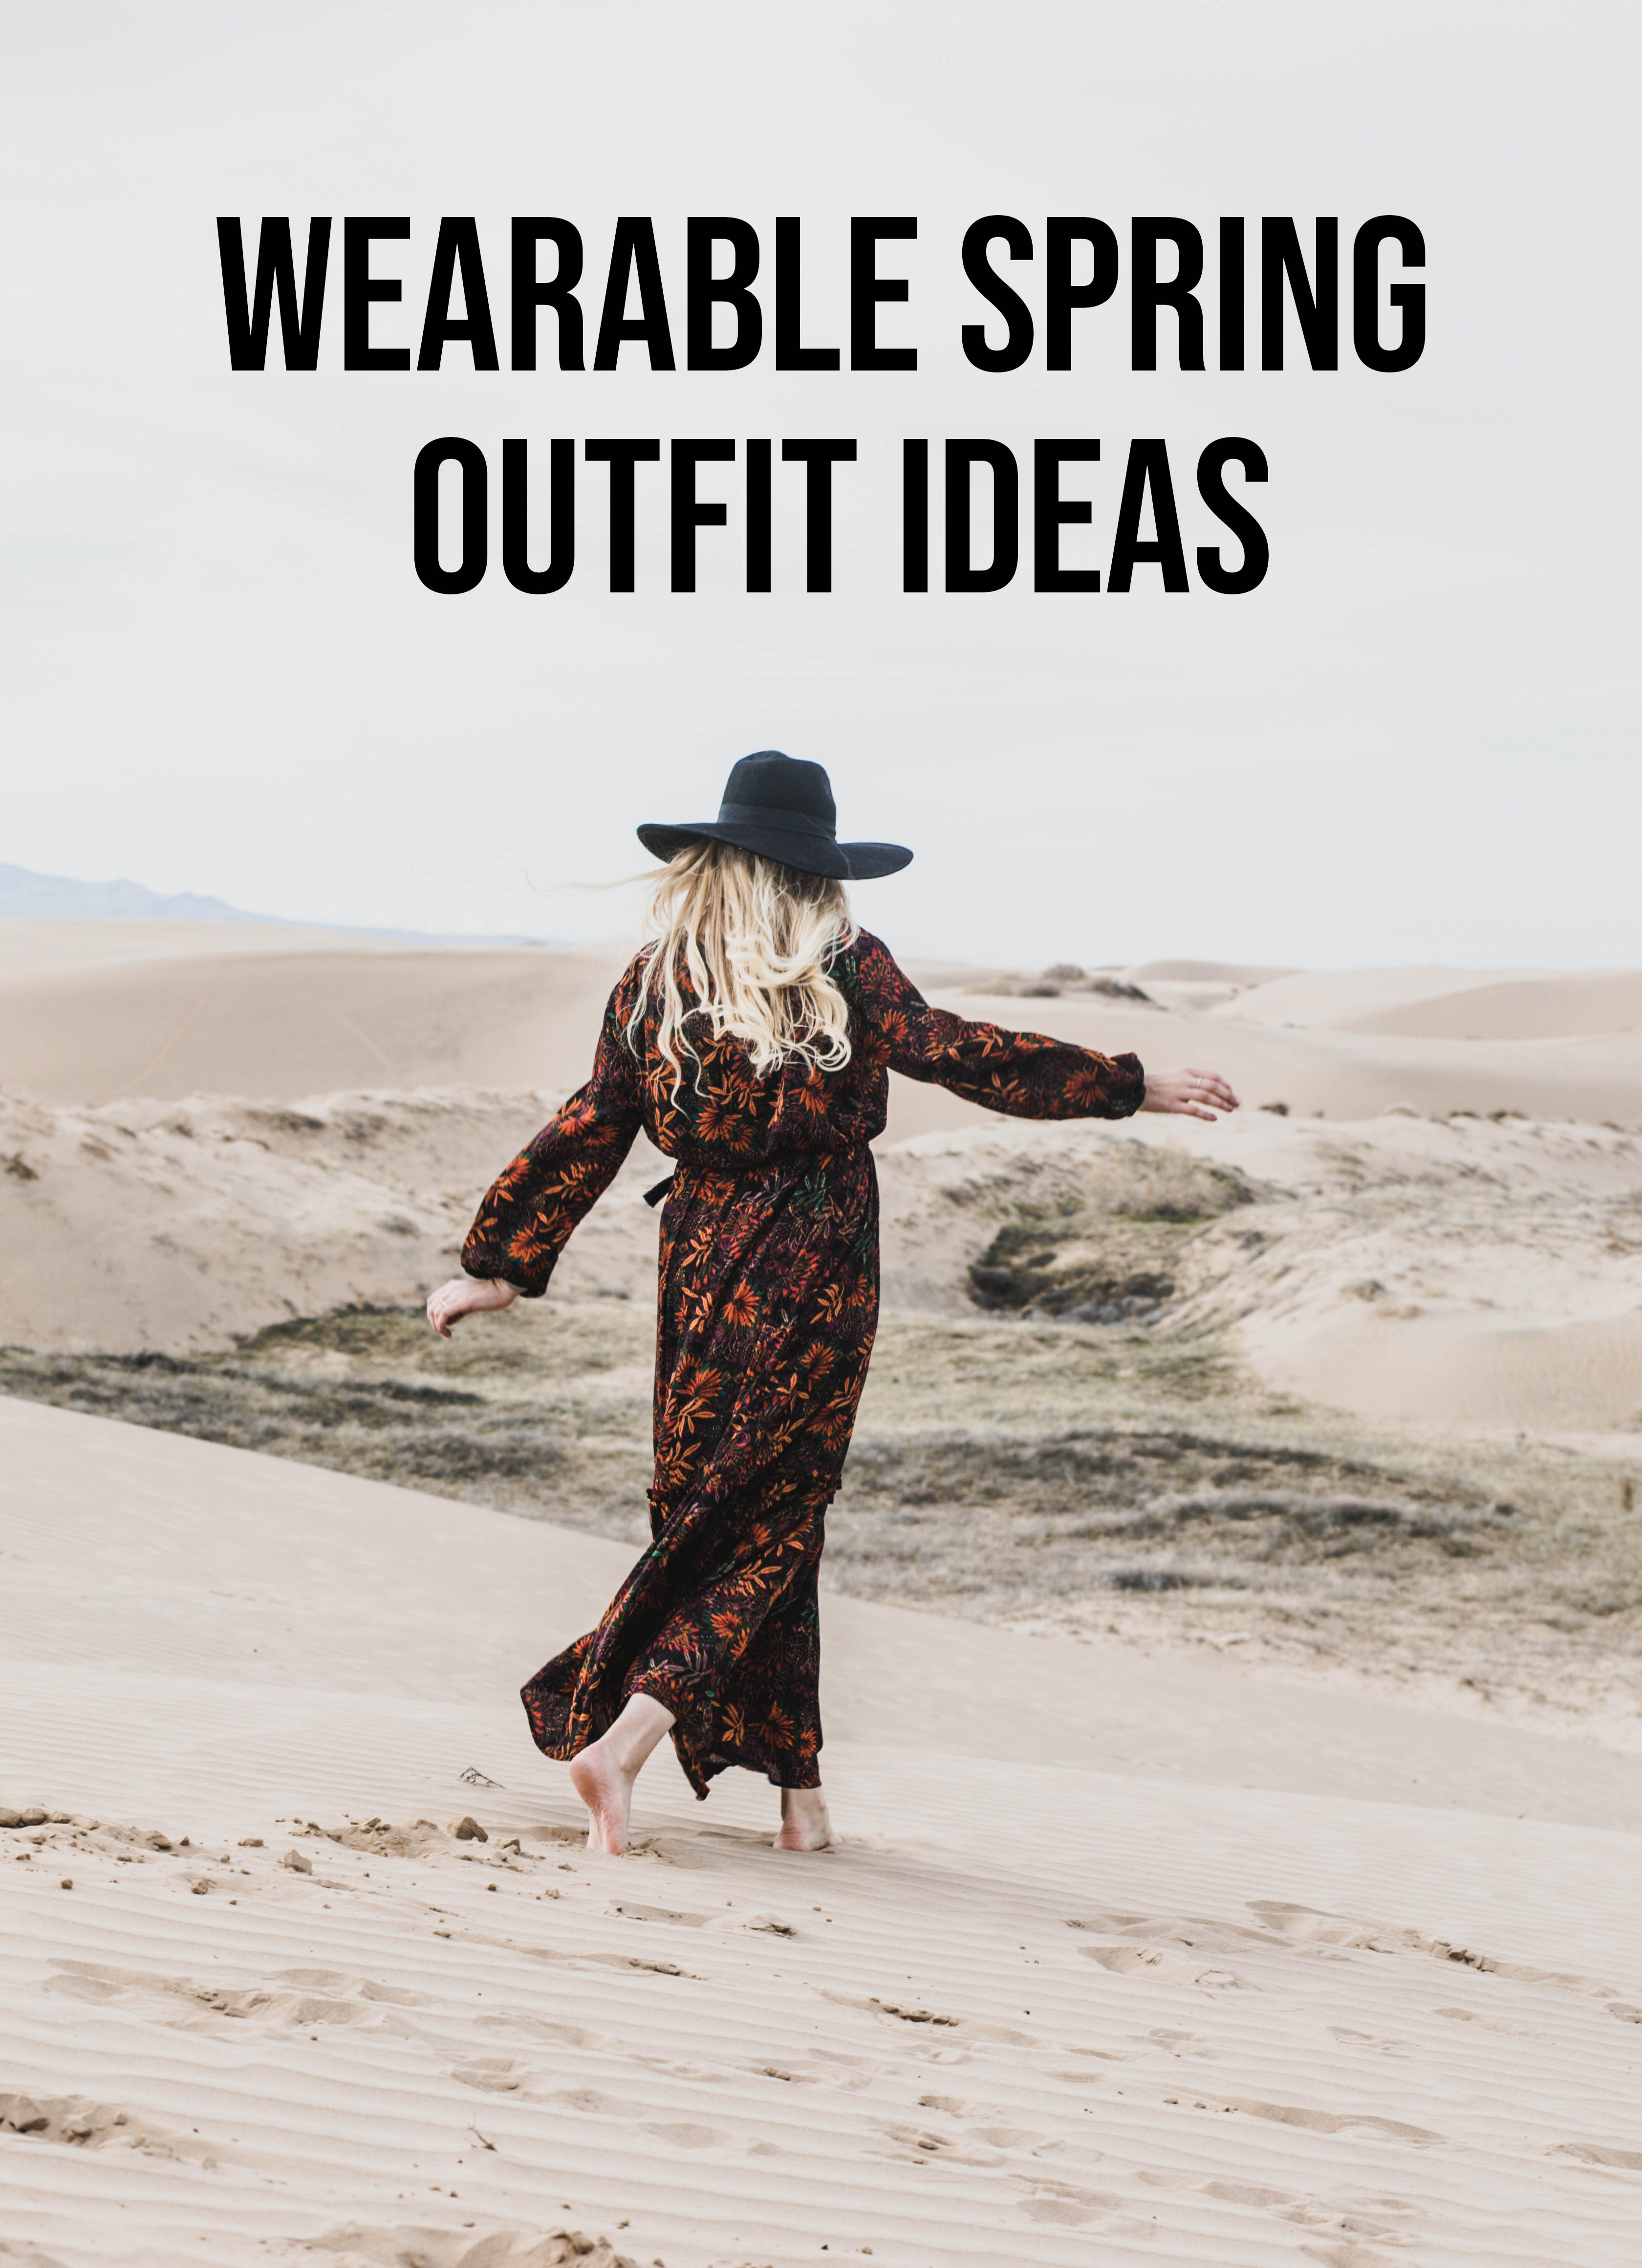 Wearable outfits spring 2019